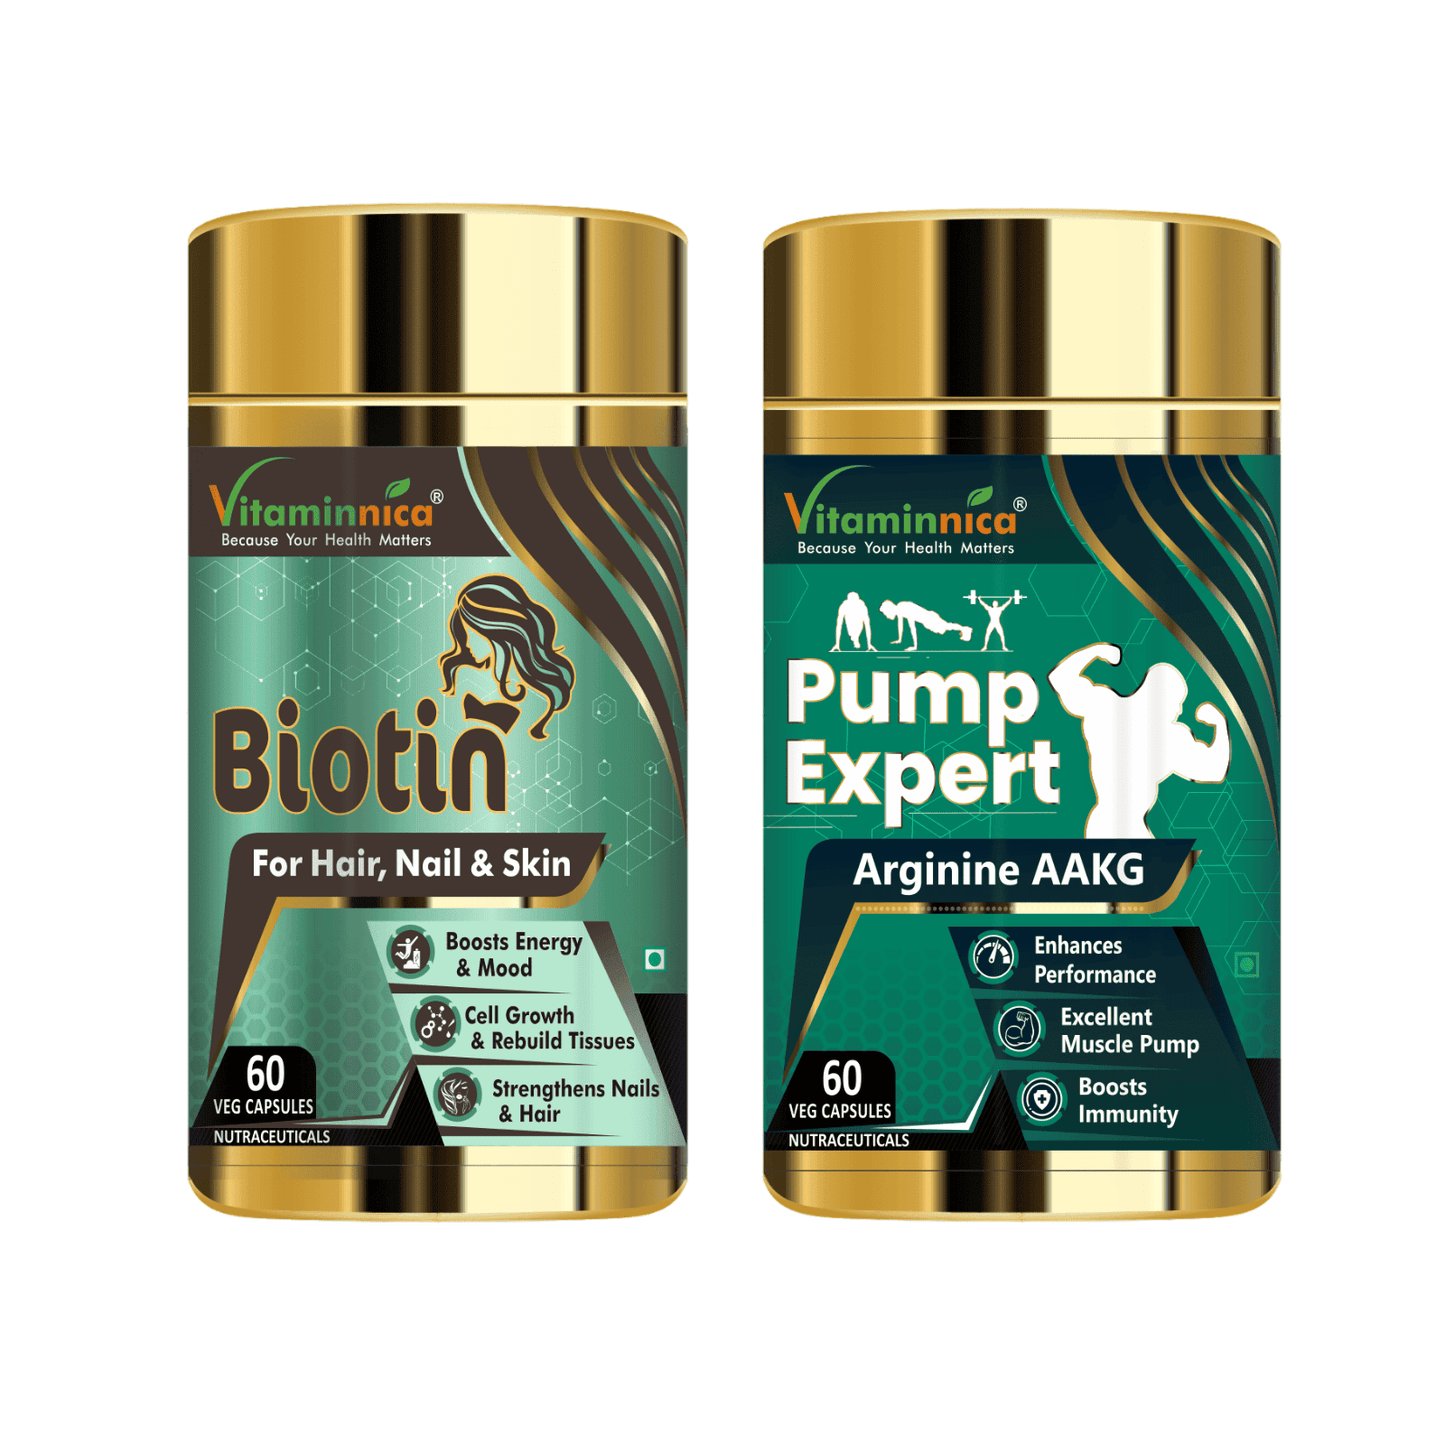 Biotin + Pump Expert Combo: Workout Performance and Muscle Pump - 120 Capsules - vitaminnicahealthcare